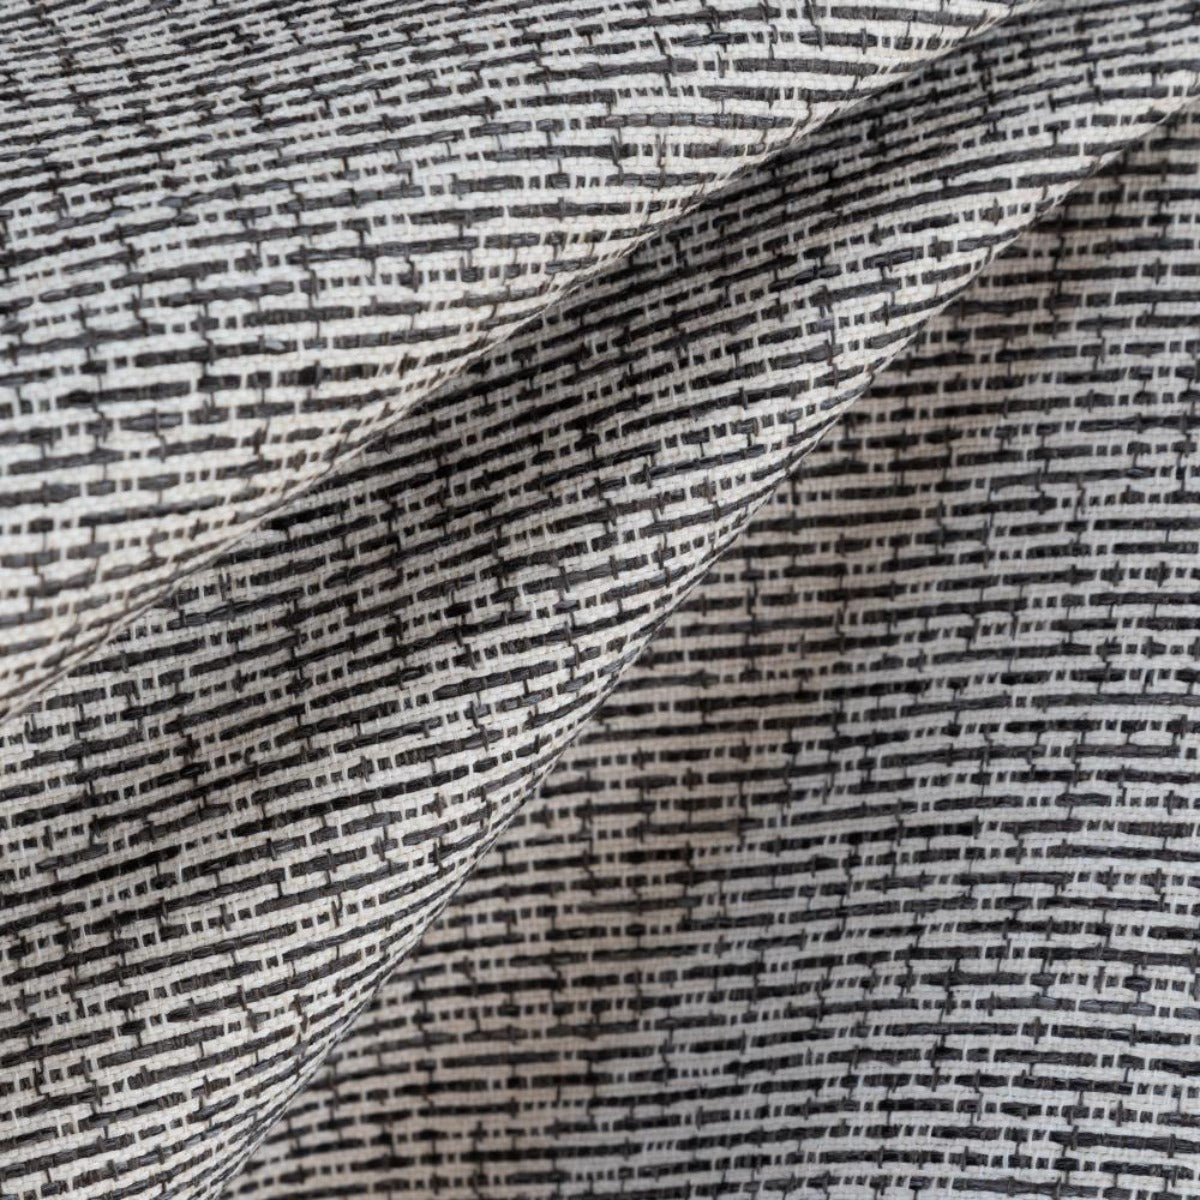 Renton Pavement, a black, grey and white textured upholstery fabric from Tonic Living